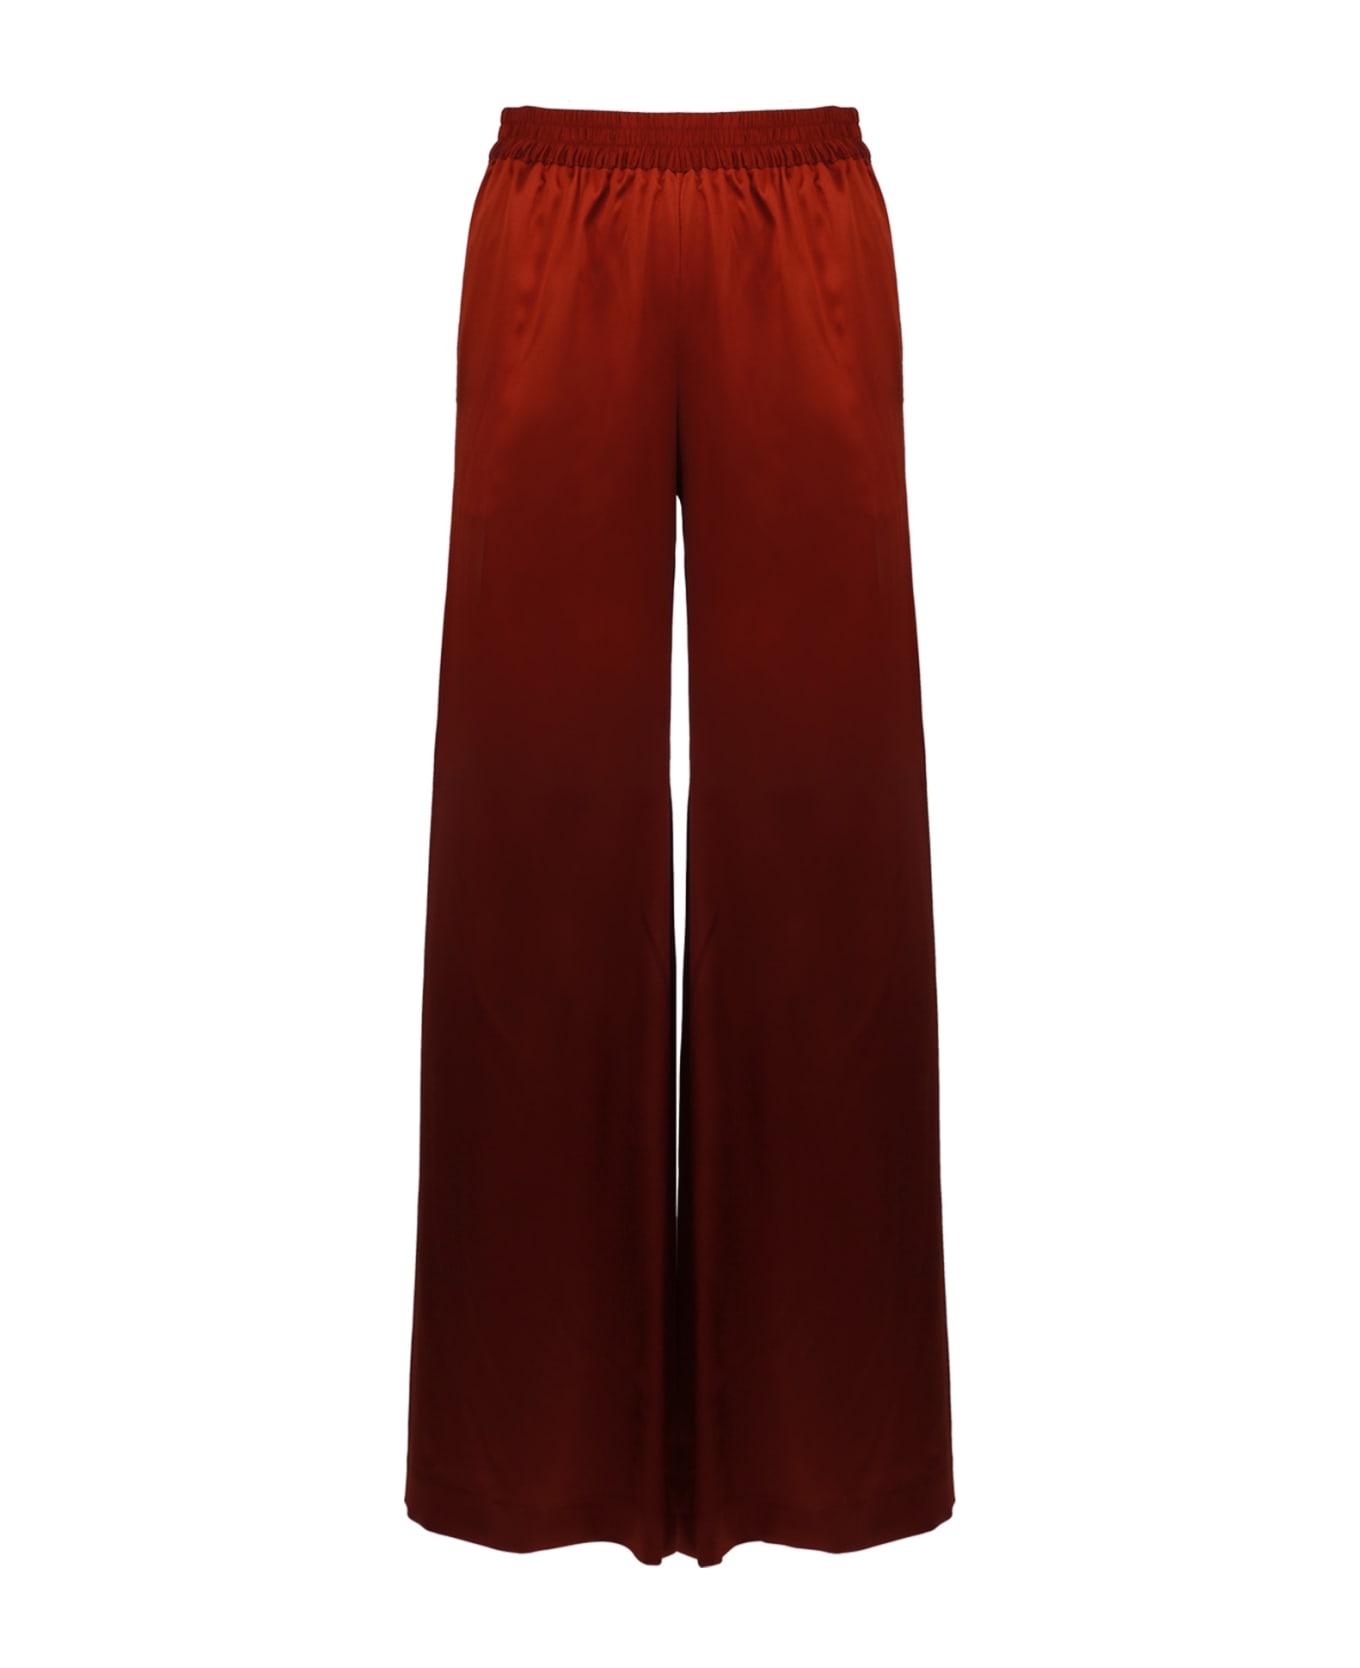 Gianluca Capannolo 'antonia' Wide Palazzo Pants - Lobster